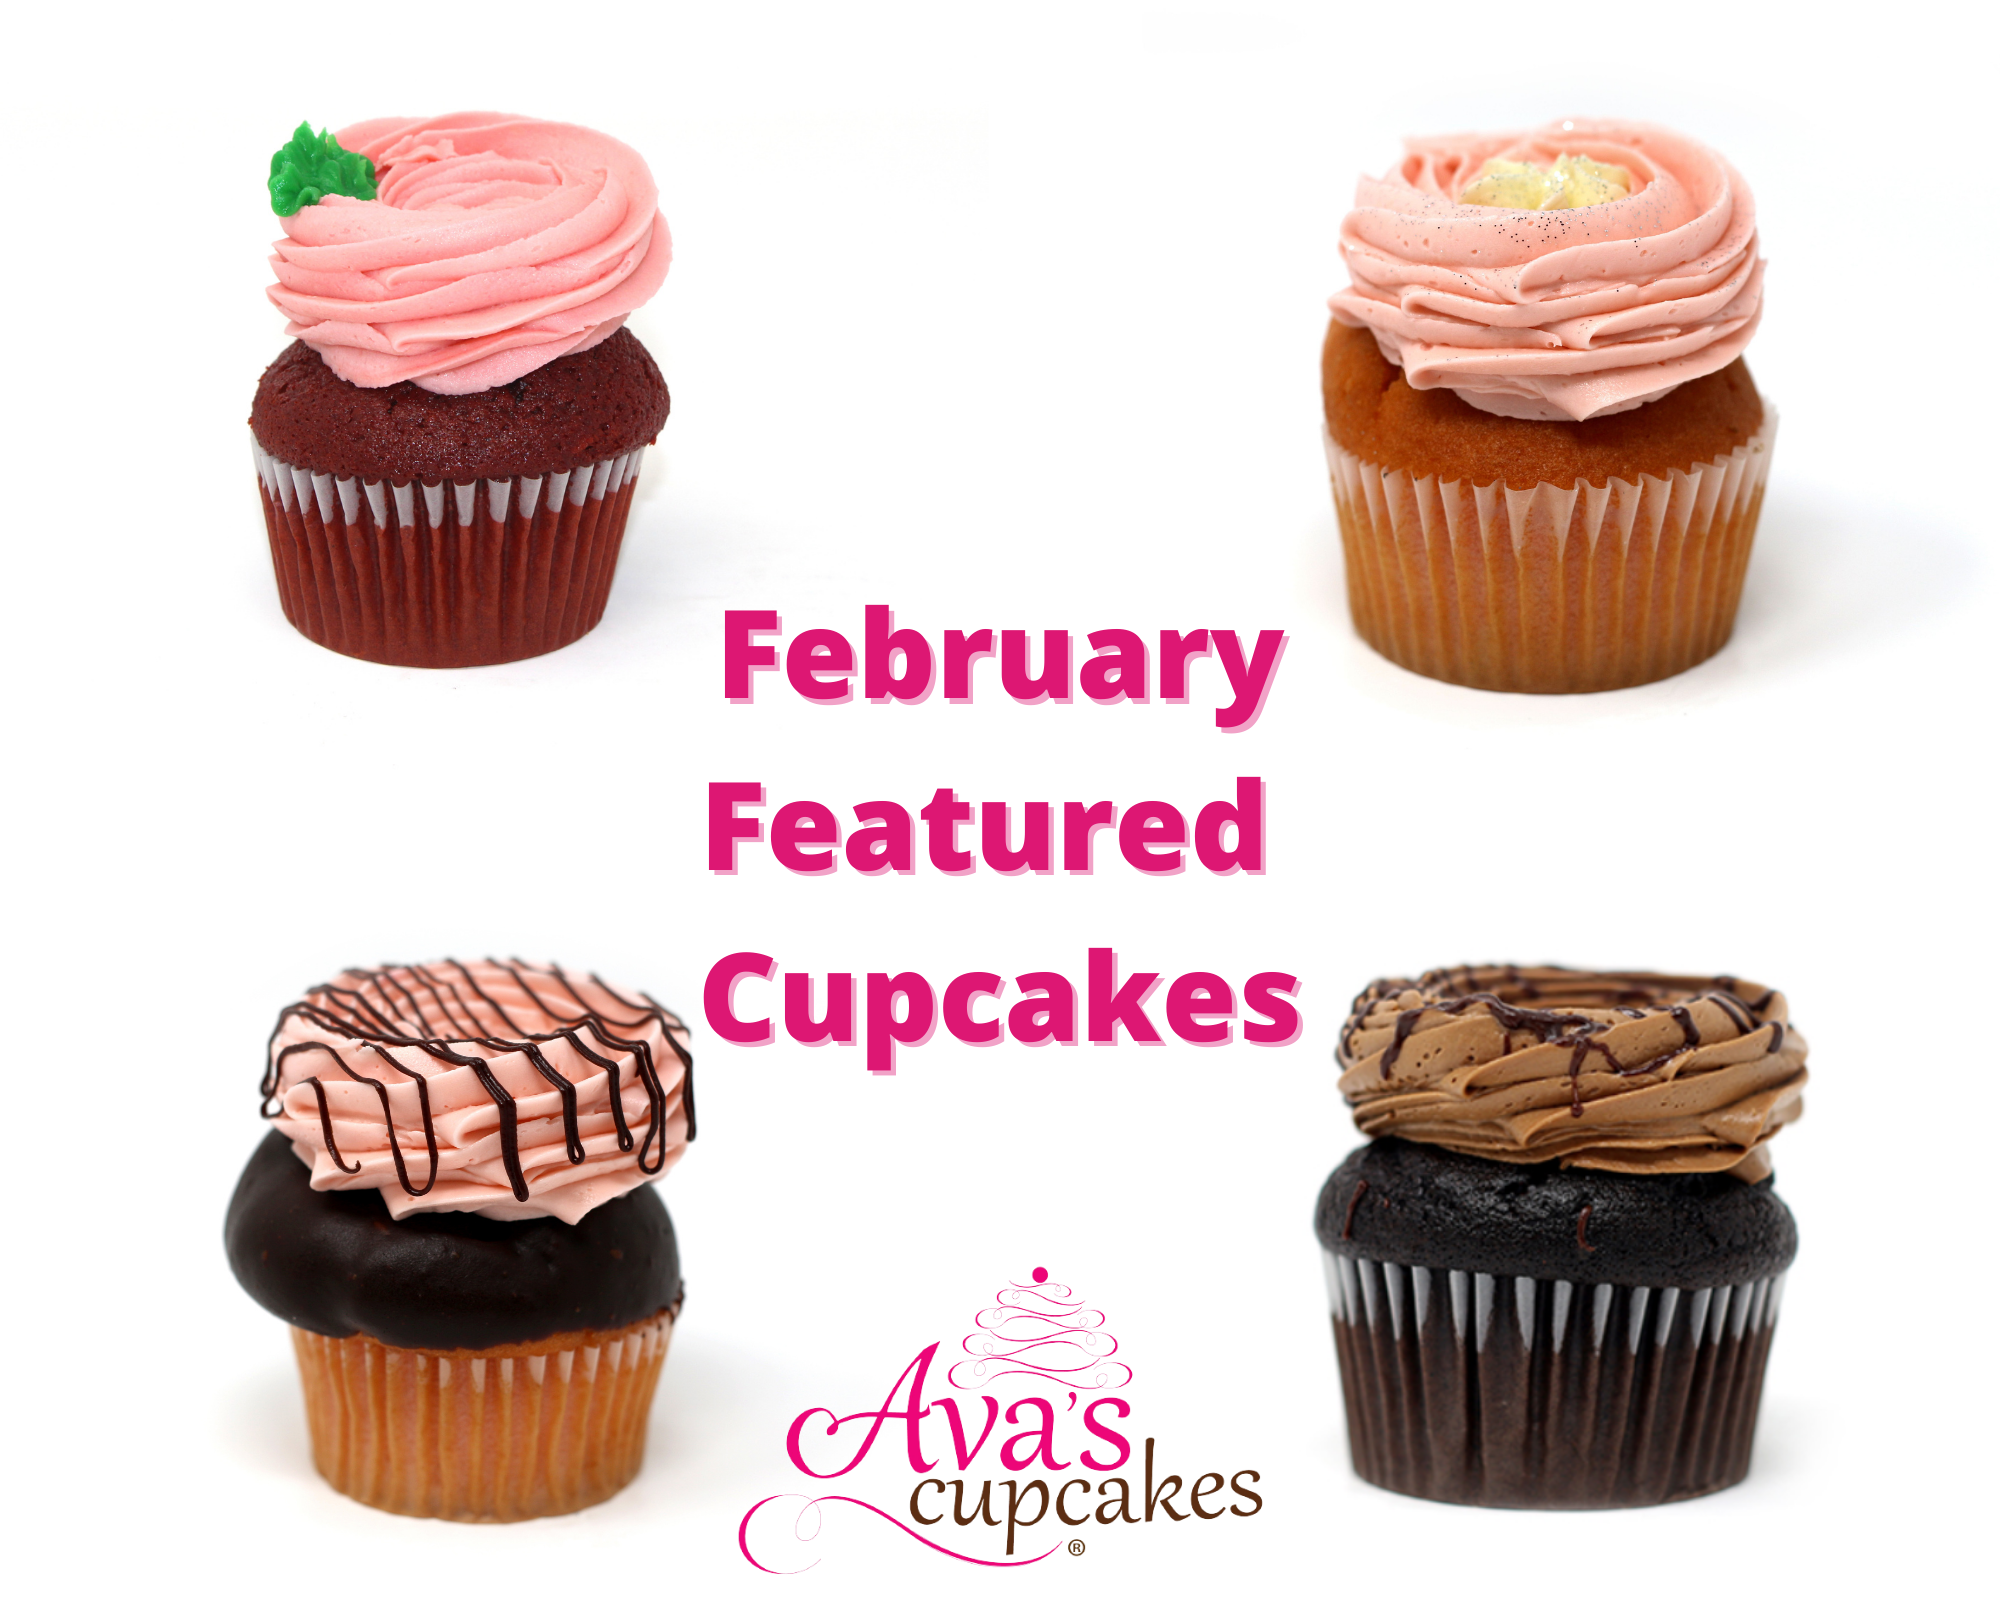 February Featured Cupcakes